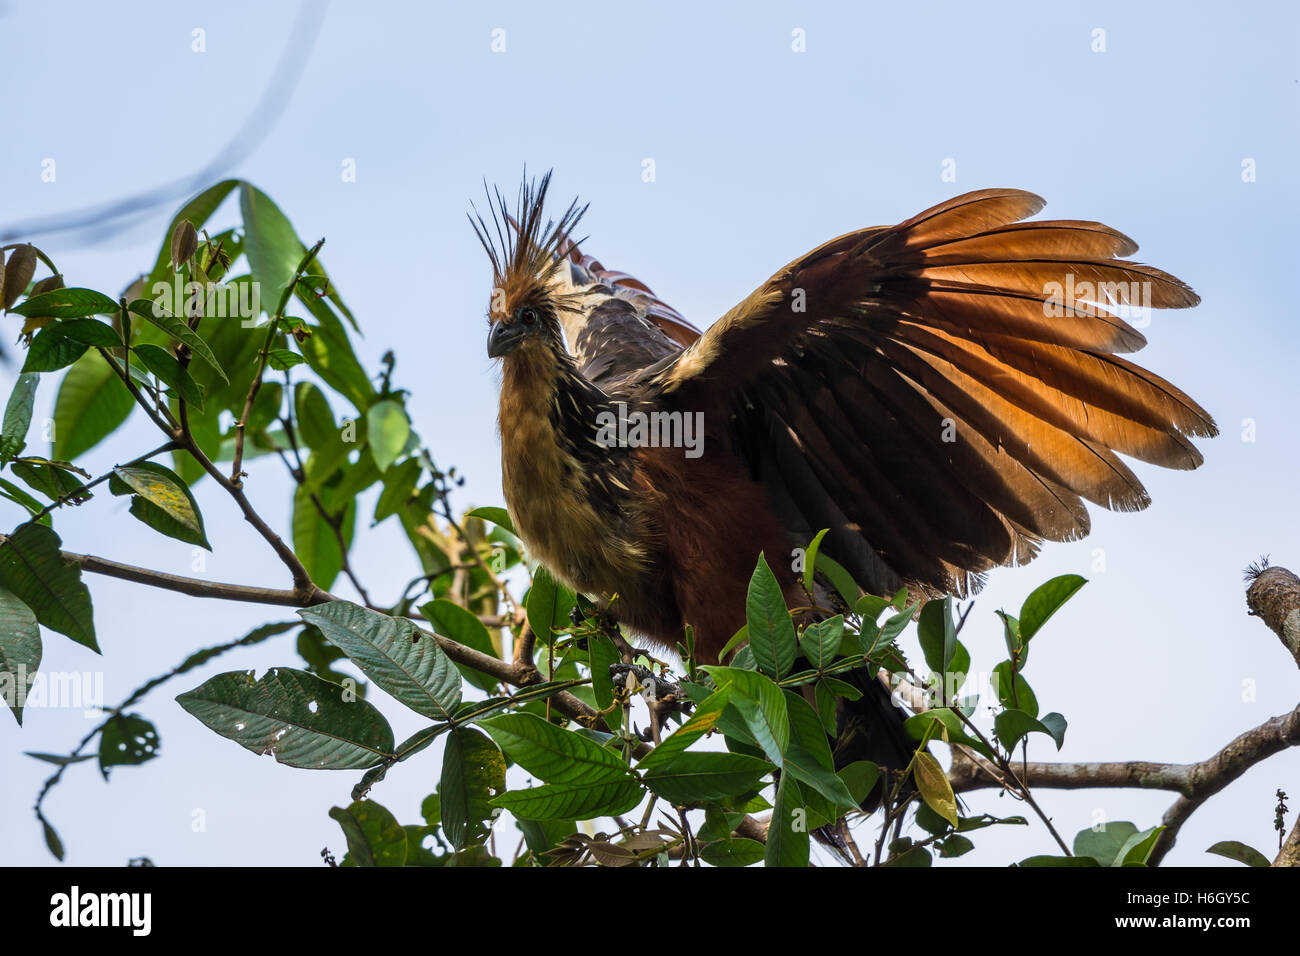 A Hoatzin (Opisthocomus hoazin) perched on a tree in the Amazons. Ecuador, South America. Stock Photo